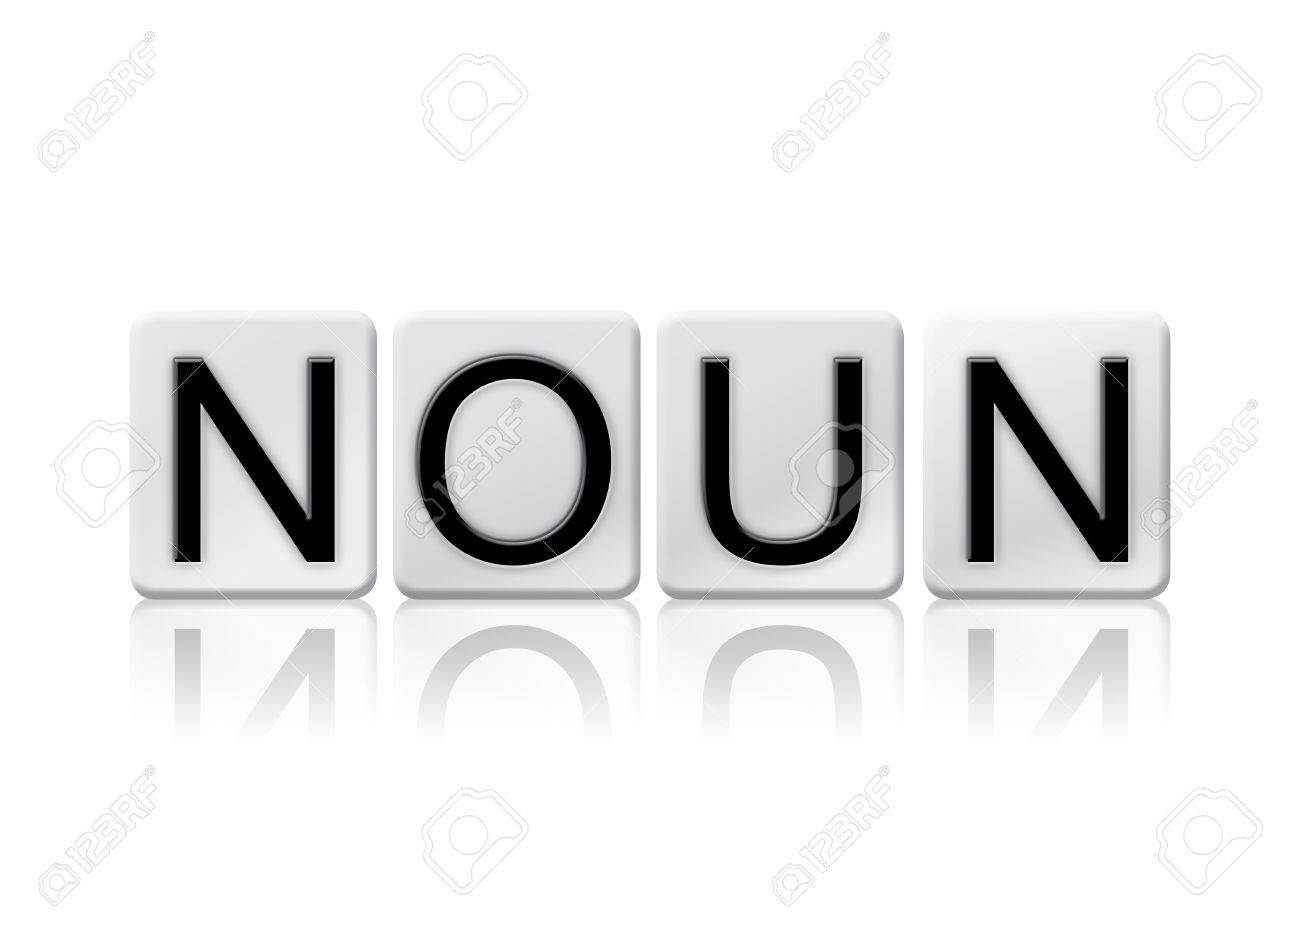 The Word Noun Written In Tile Letters Isolated On A White